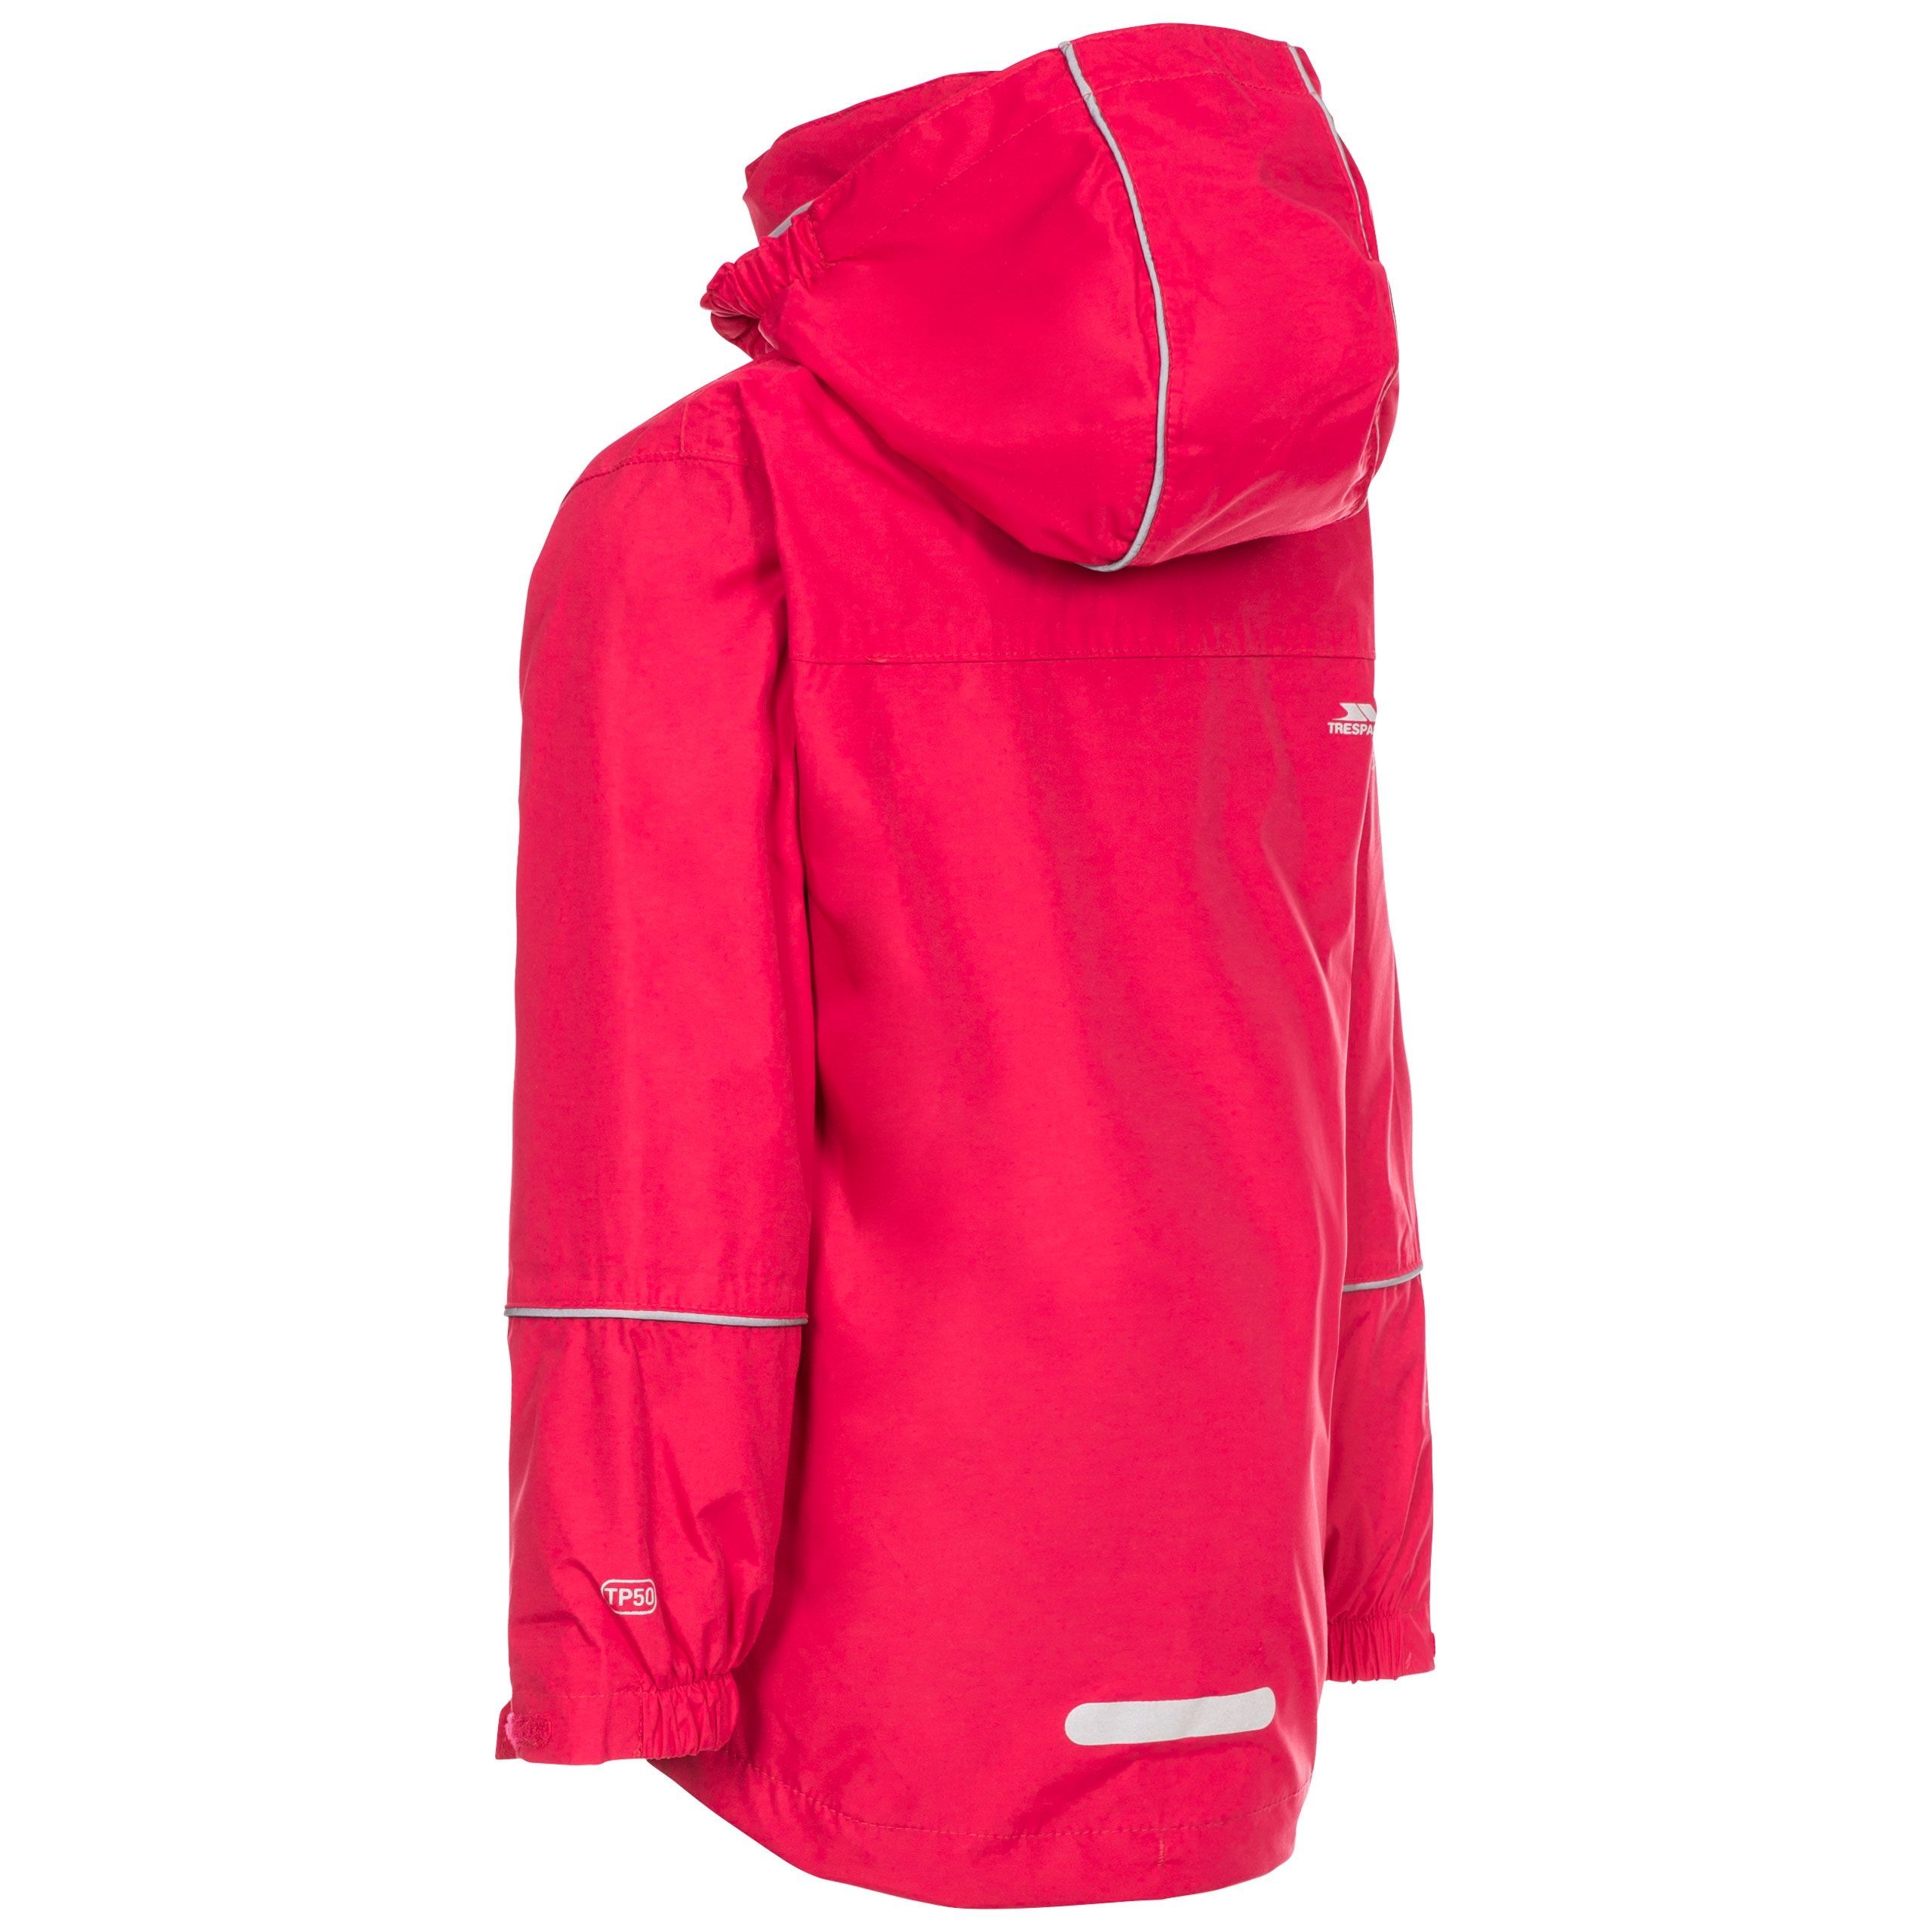 Waterproof 2000mm, Windproof, Taped Seams. 3 in 1 Jacket. 2 Front Page Pockets. 2 Top Entry Pockets. 1 Upper Chest Pocket. Adjustable Cuffs. Concealed Fold Away Hood. Hem Drawcord. Shell: 100% Polyester PU, Lining: 100% Polyester, Inner Fleece: 100% Polyester. Trespass Childrens Chest Sizing (approx): 2/3 Years - 21in/53cm, 3/4 Years - 22in/56cm, 5/6 Years - 24in/61cm, 7/8 Years - 26in/66cm, 9/10 Years - 28in/71cm, 11/12 Years - 31in/79cm.